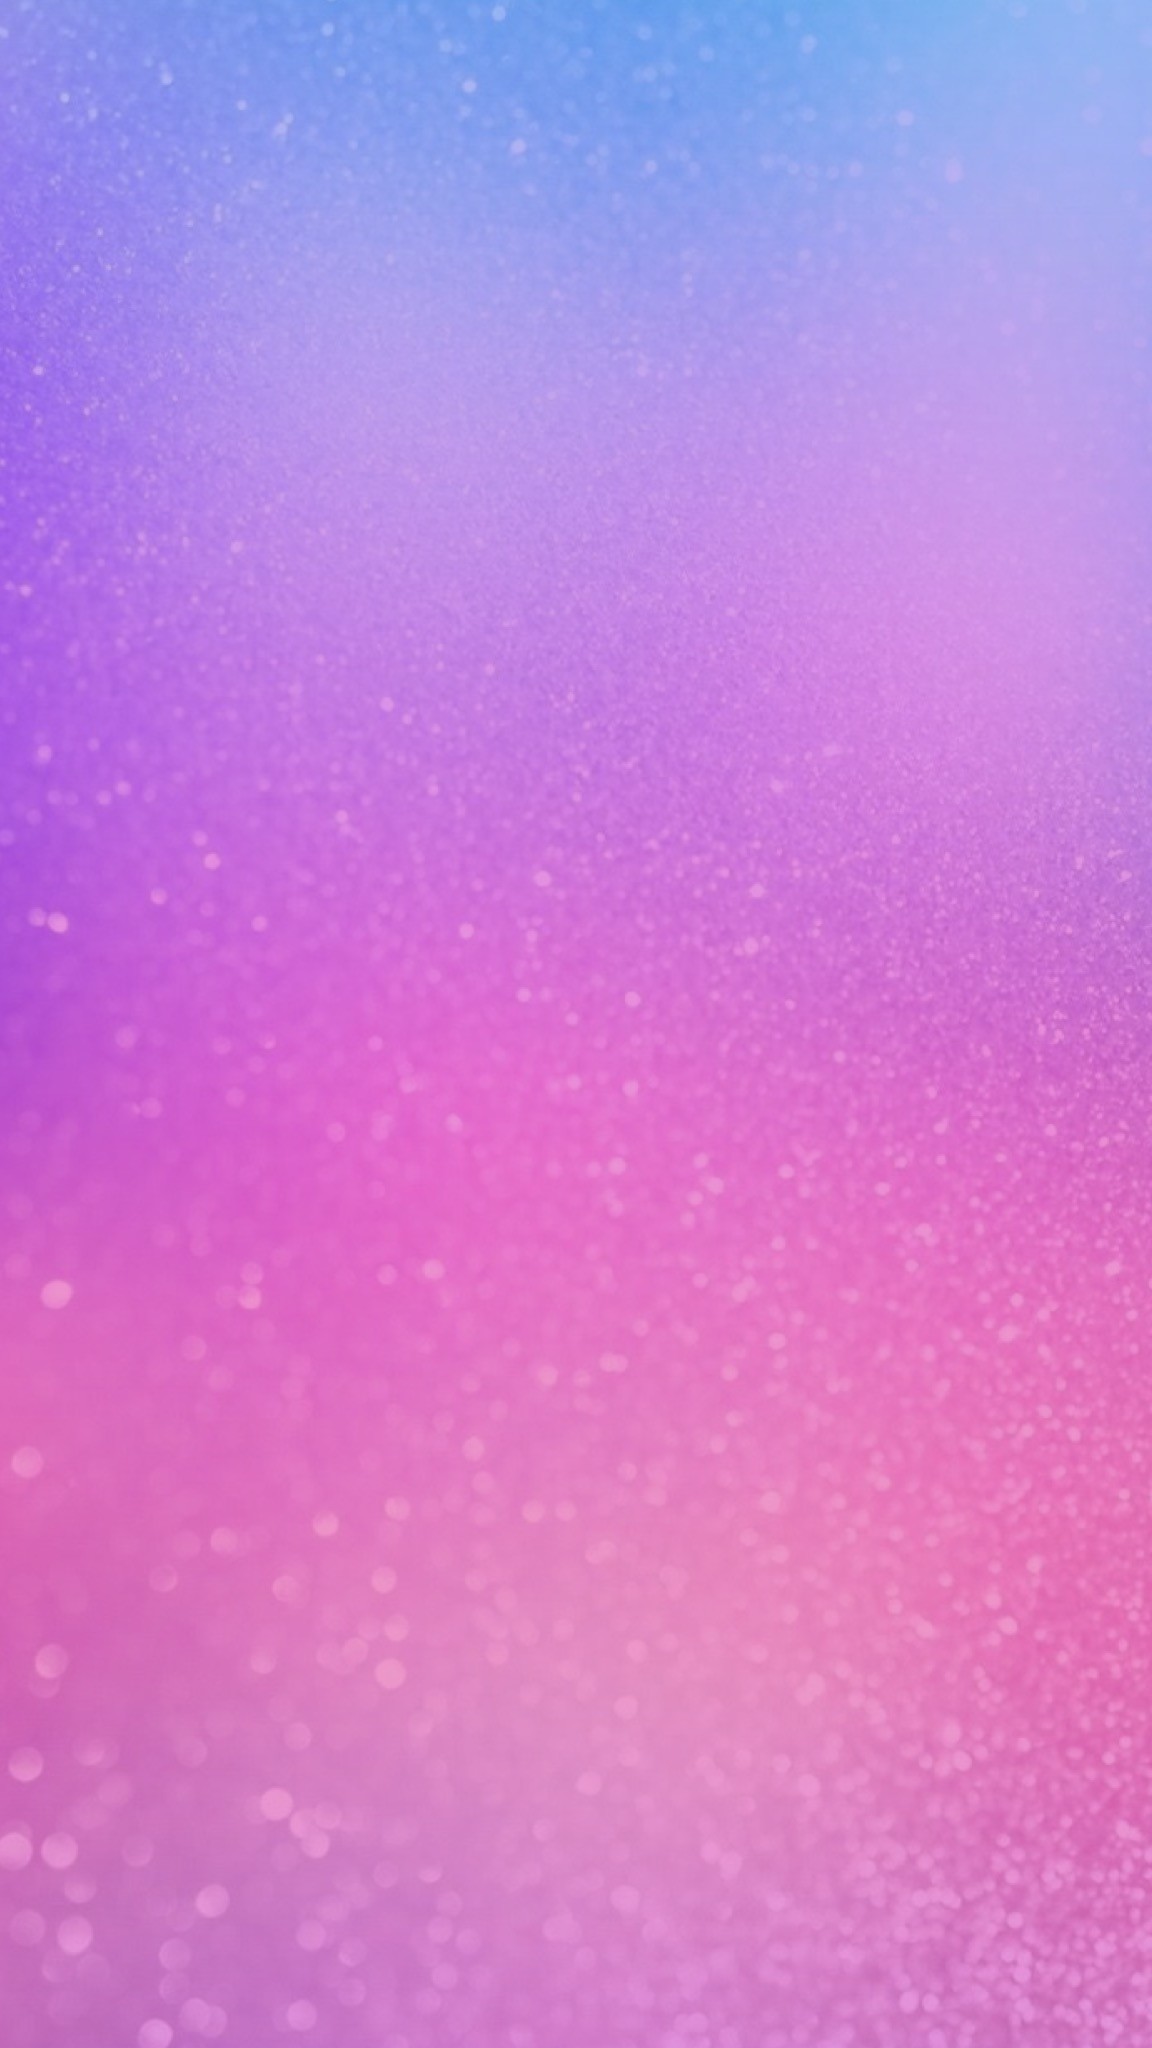 1152x2048 Pink Glitter Phone Wallpaper. Original image not by me! I just made the  ombrÃ©/gradient. Glitter,